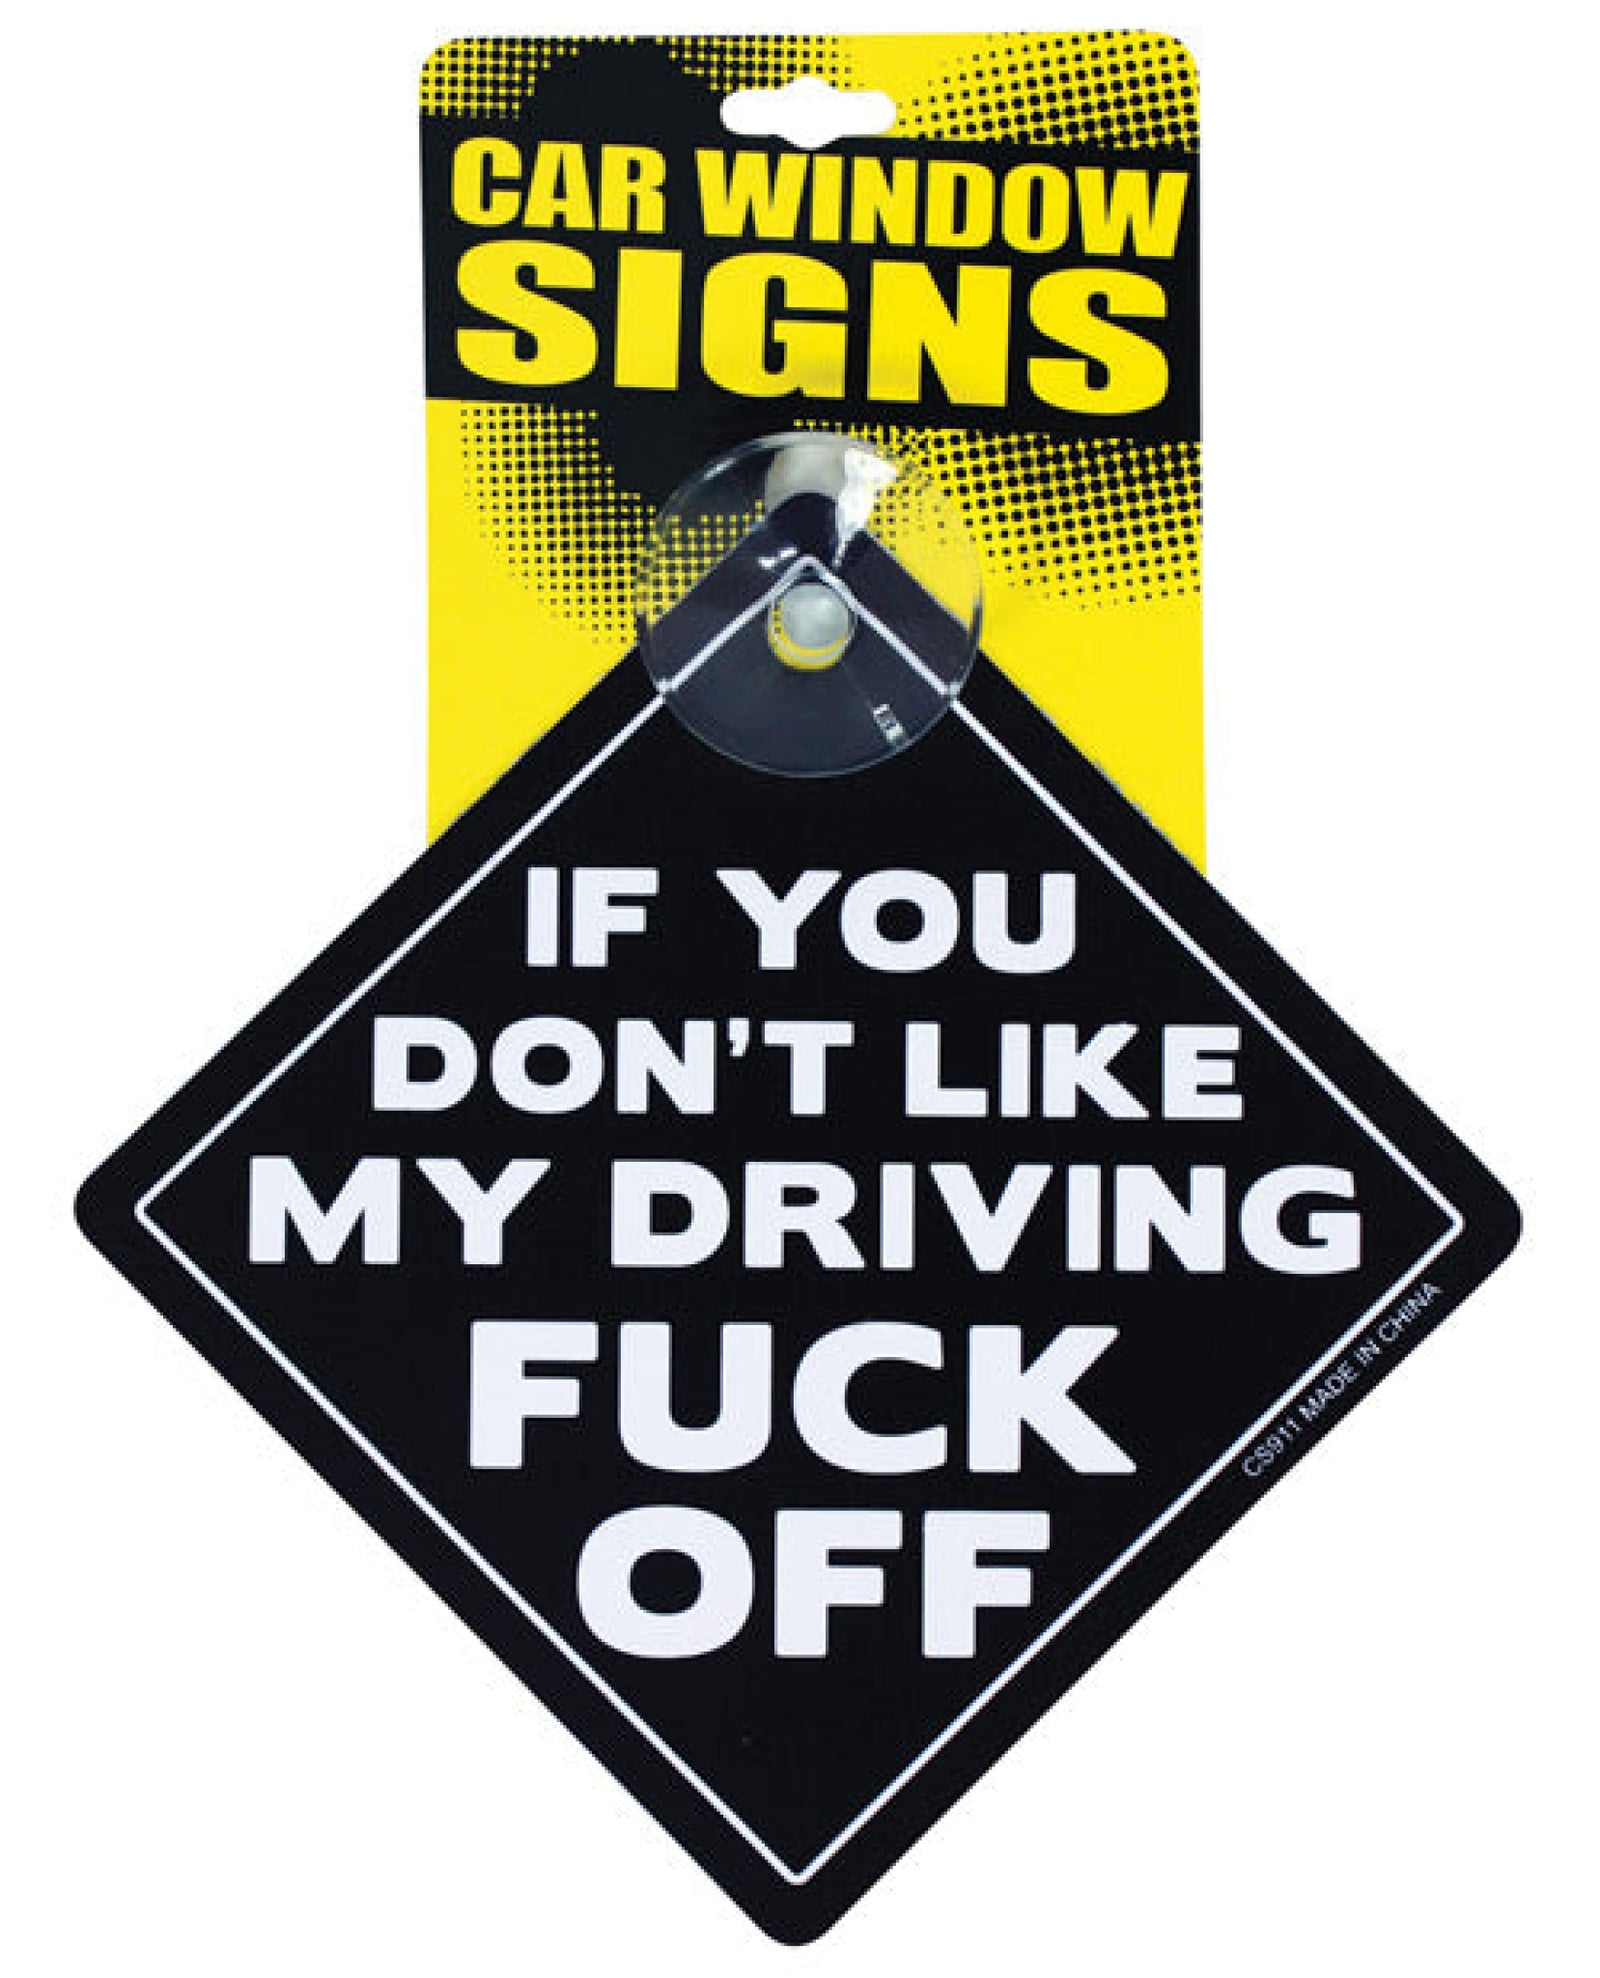 If You Don't Like My Driving Fuck Off Car Window Signs Kalan